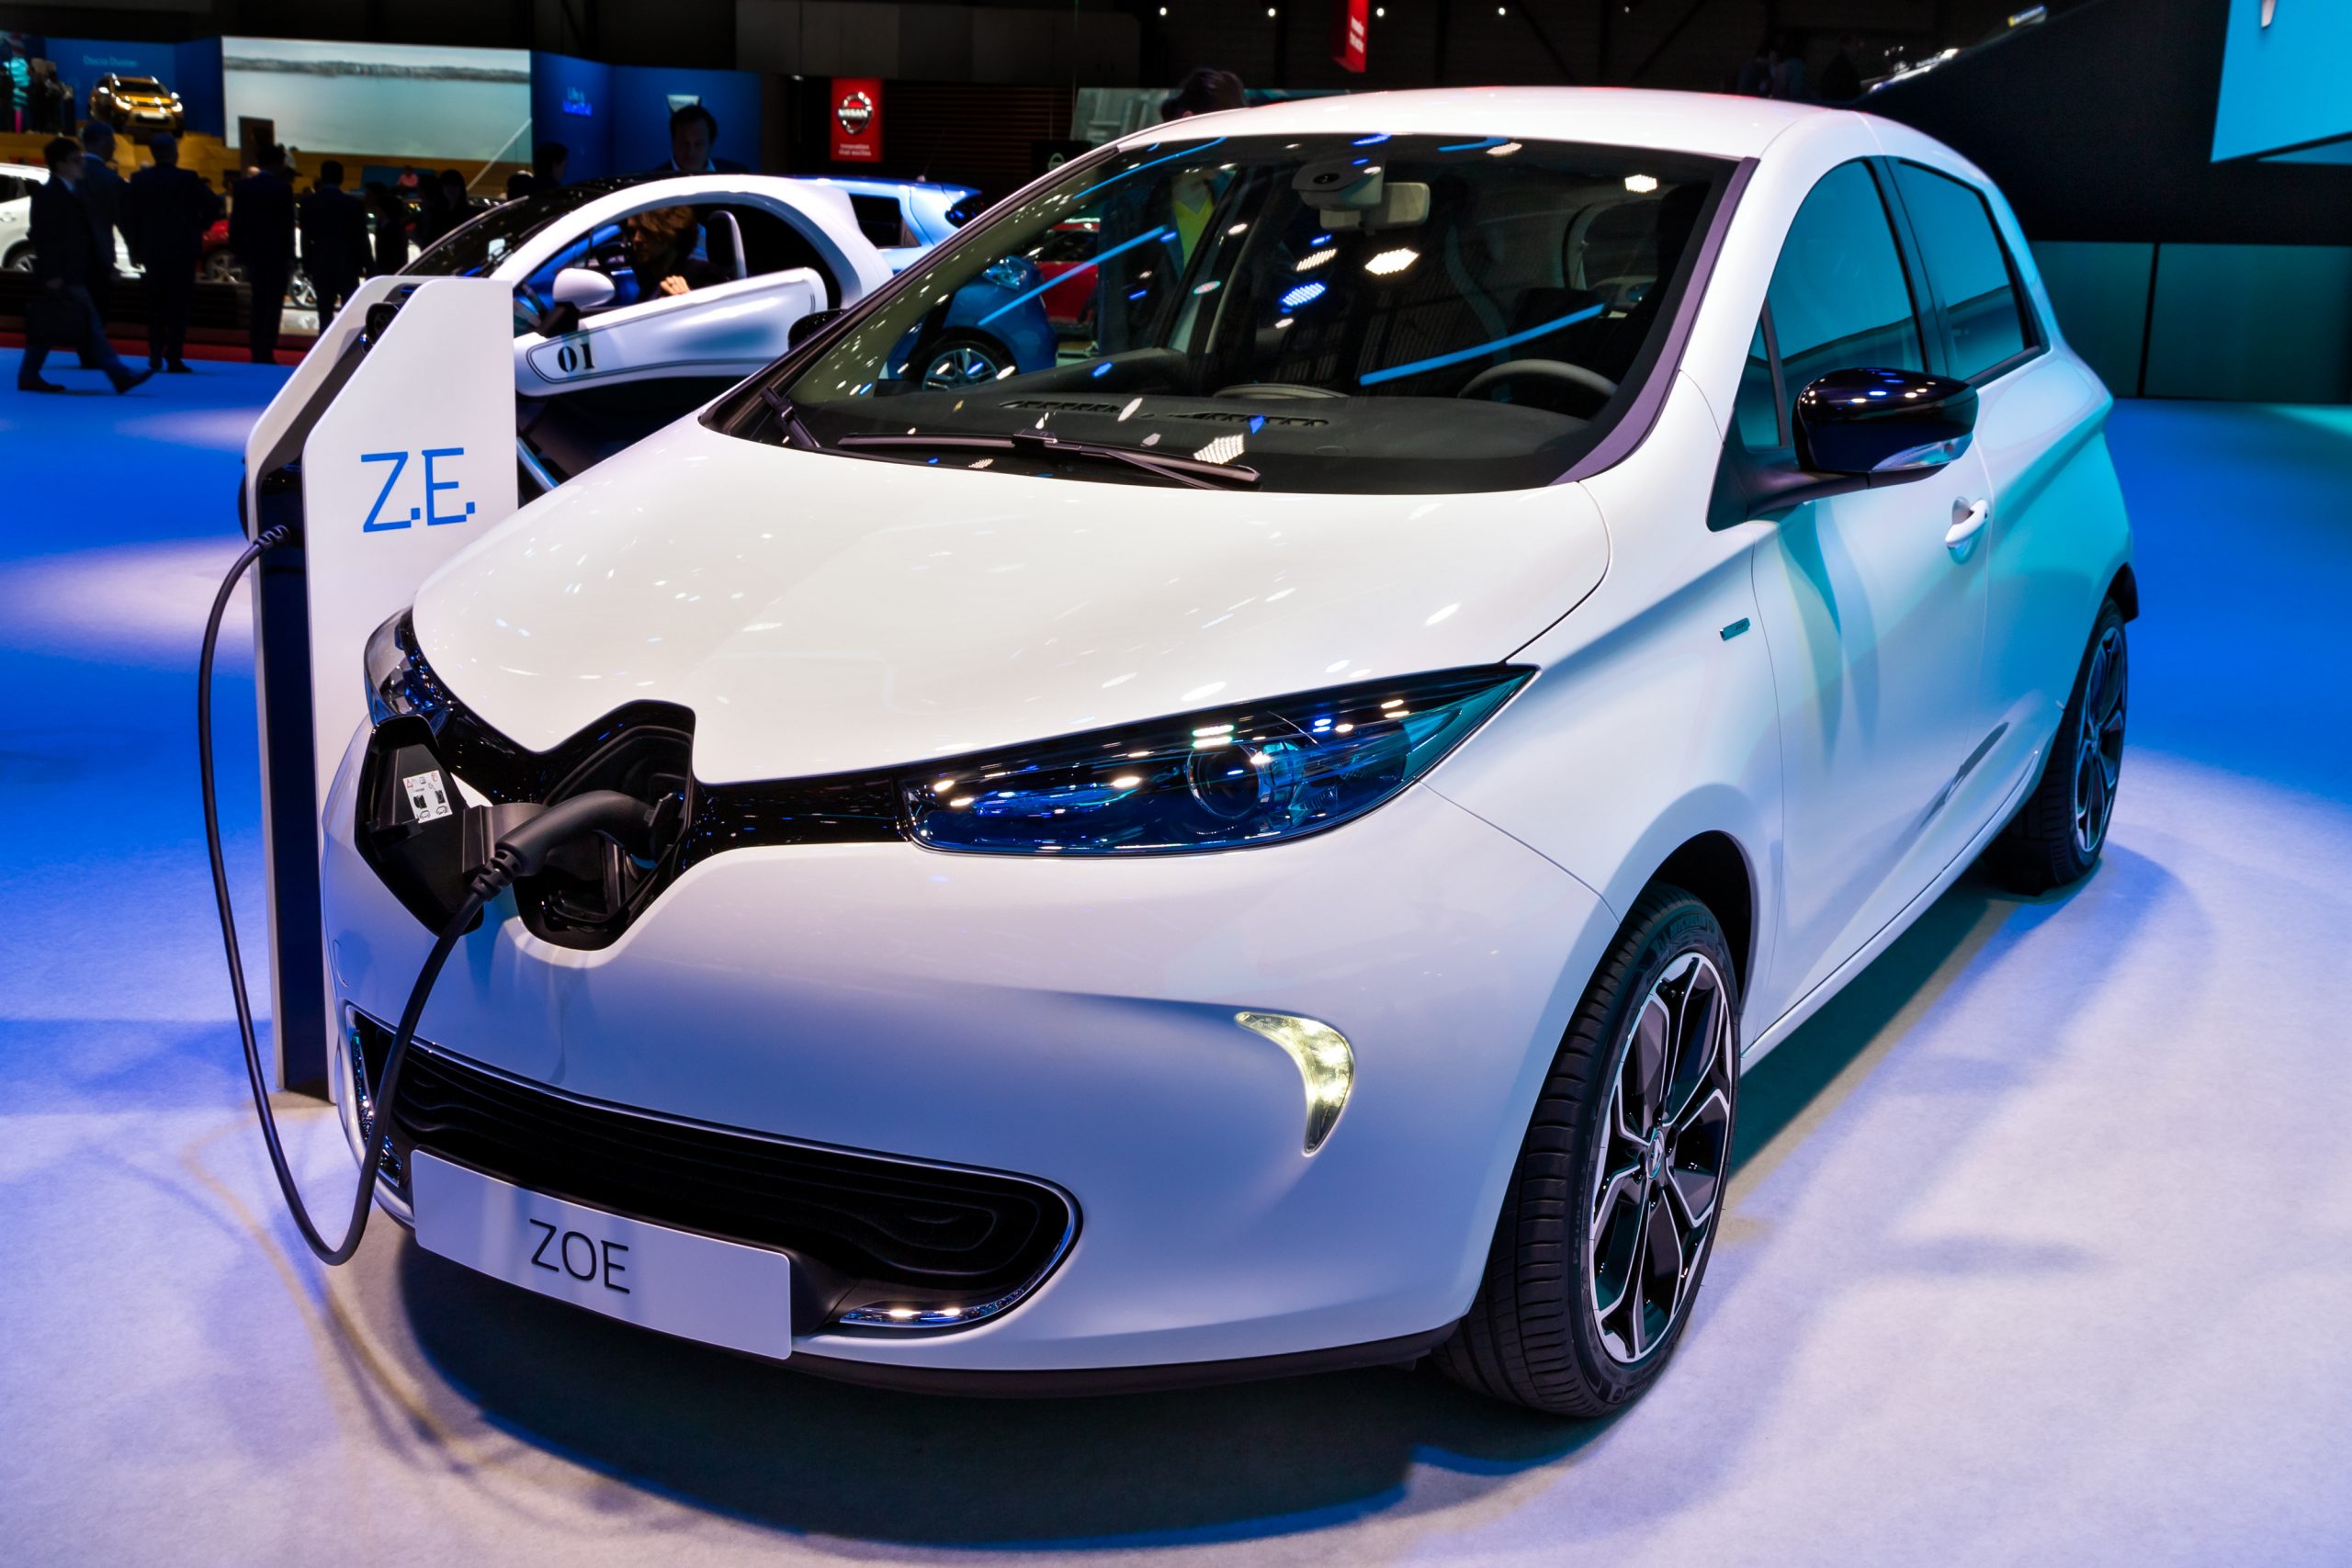 New Renault Zoe electric car